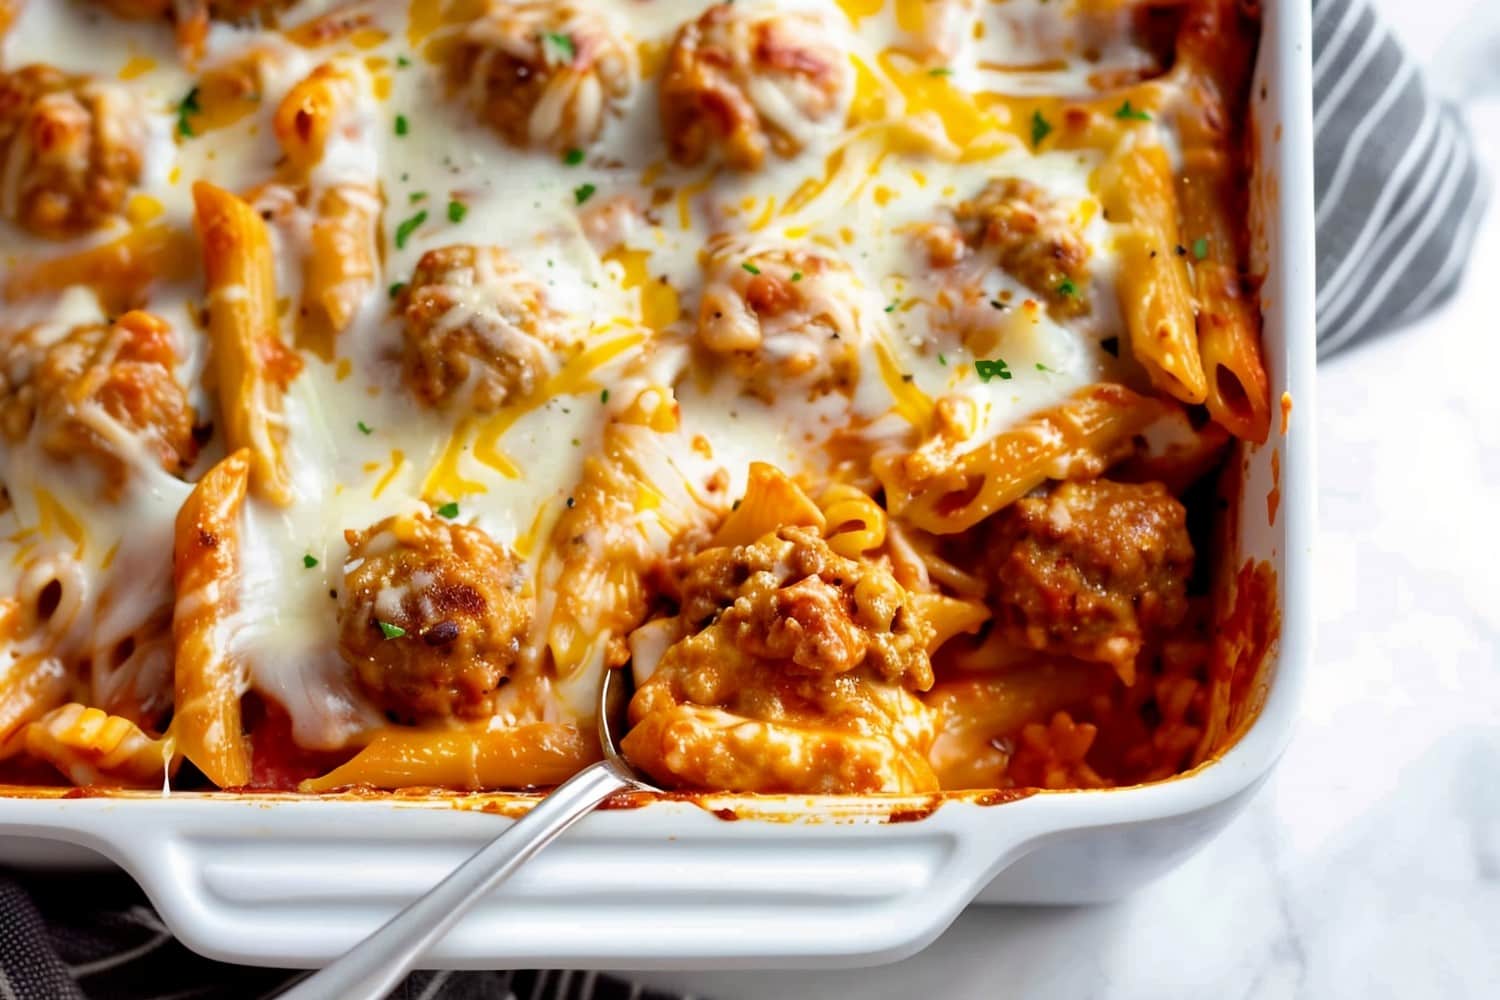 Meatball casserole with ziti pasta and tomato sauce, an easy-to-make comfort food classic that's perfect for any occasion